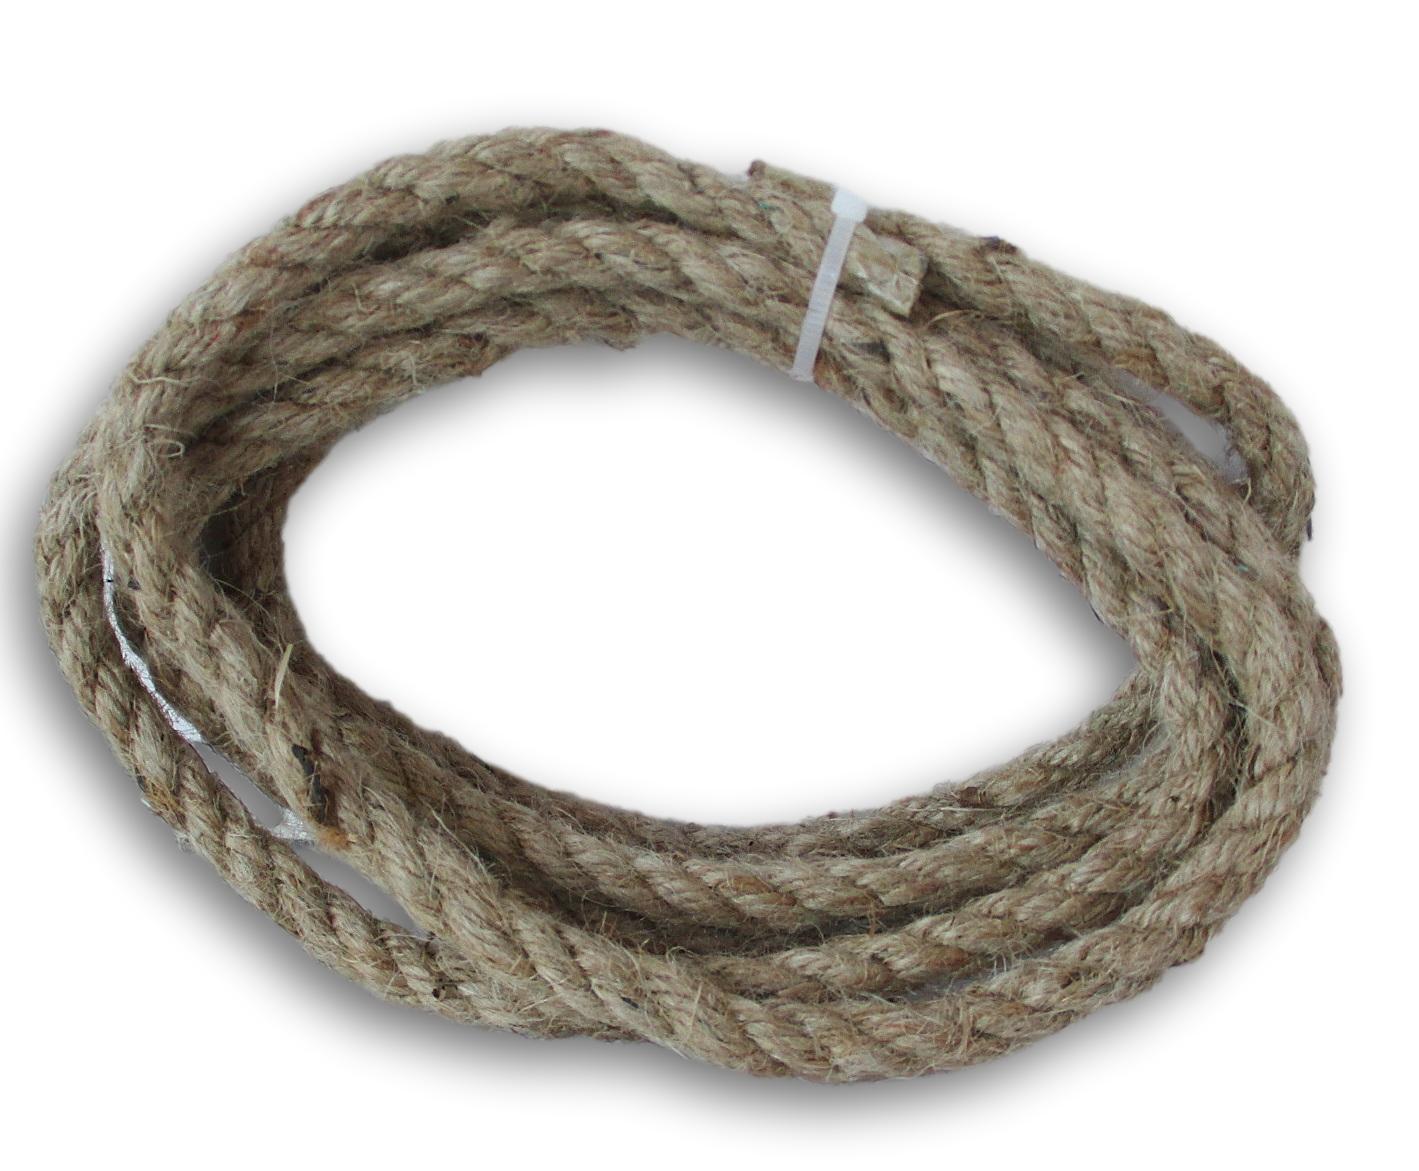 Nautical Rope - Brown Jute Rope for Rustic Crafts and Decoration - 8 Feet 